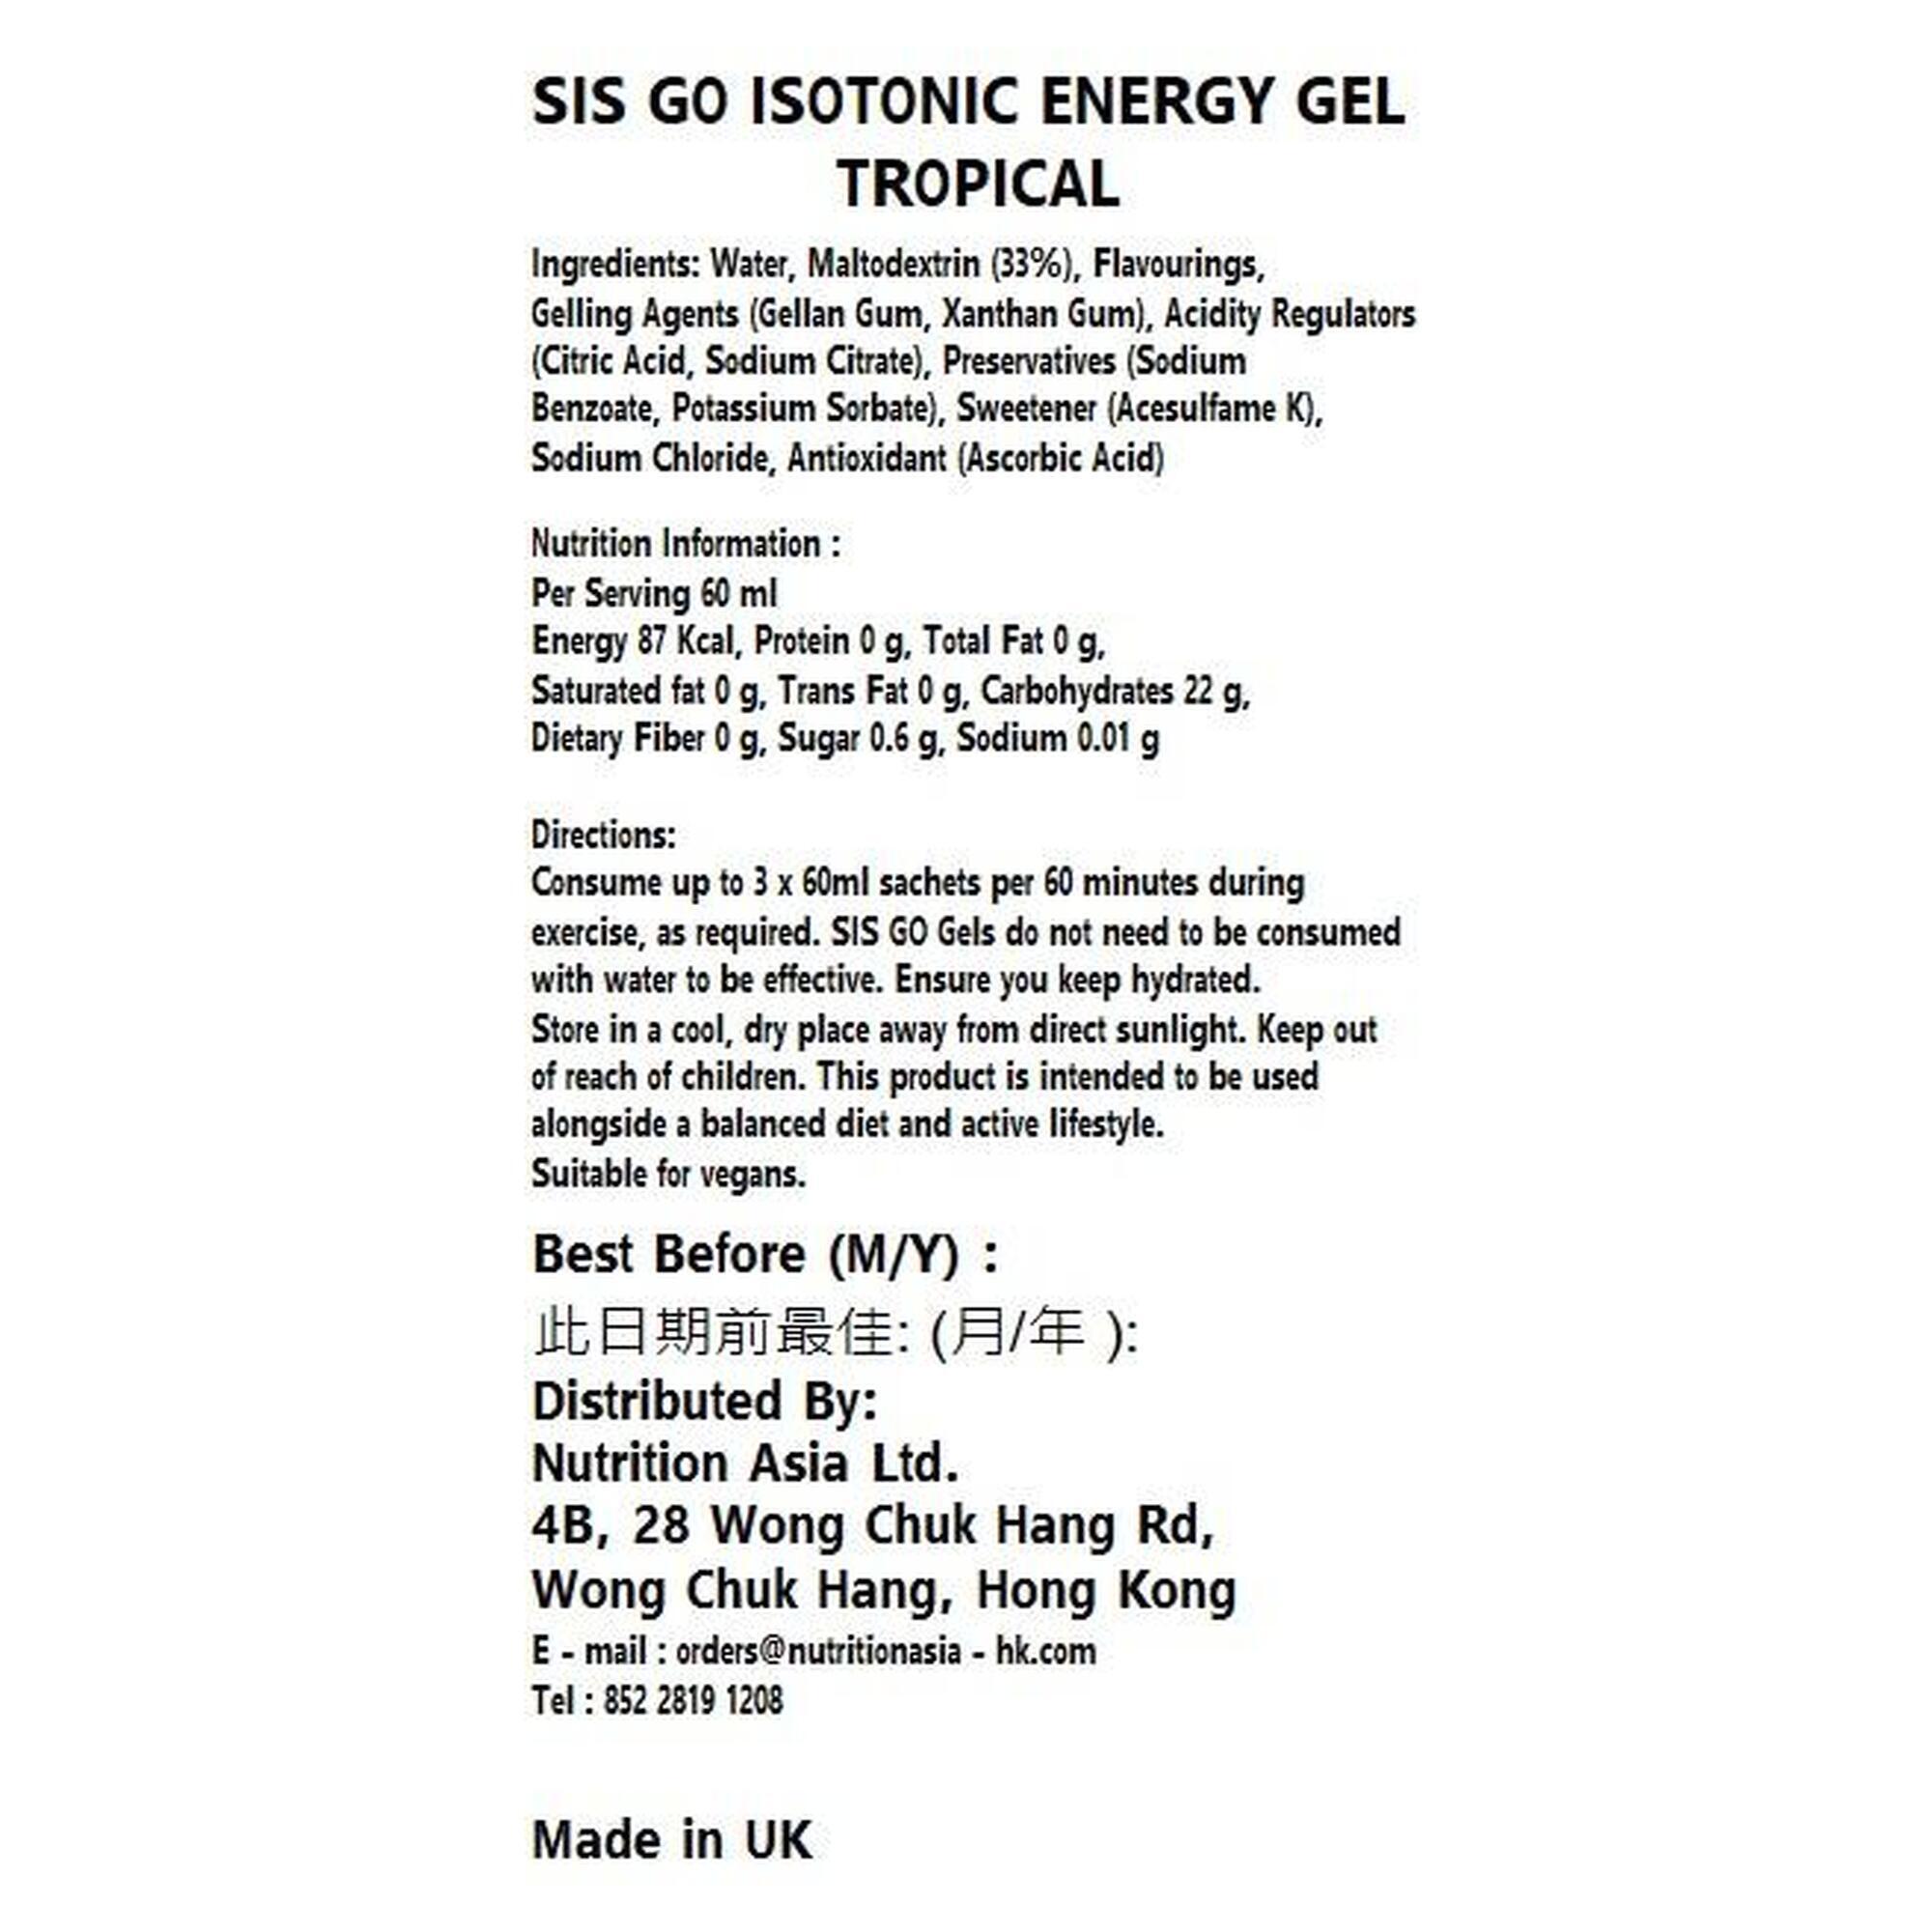 Go Isotonic Energy Gel 60g (6 PACK) - Tropical